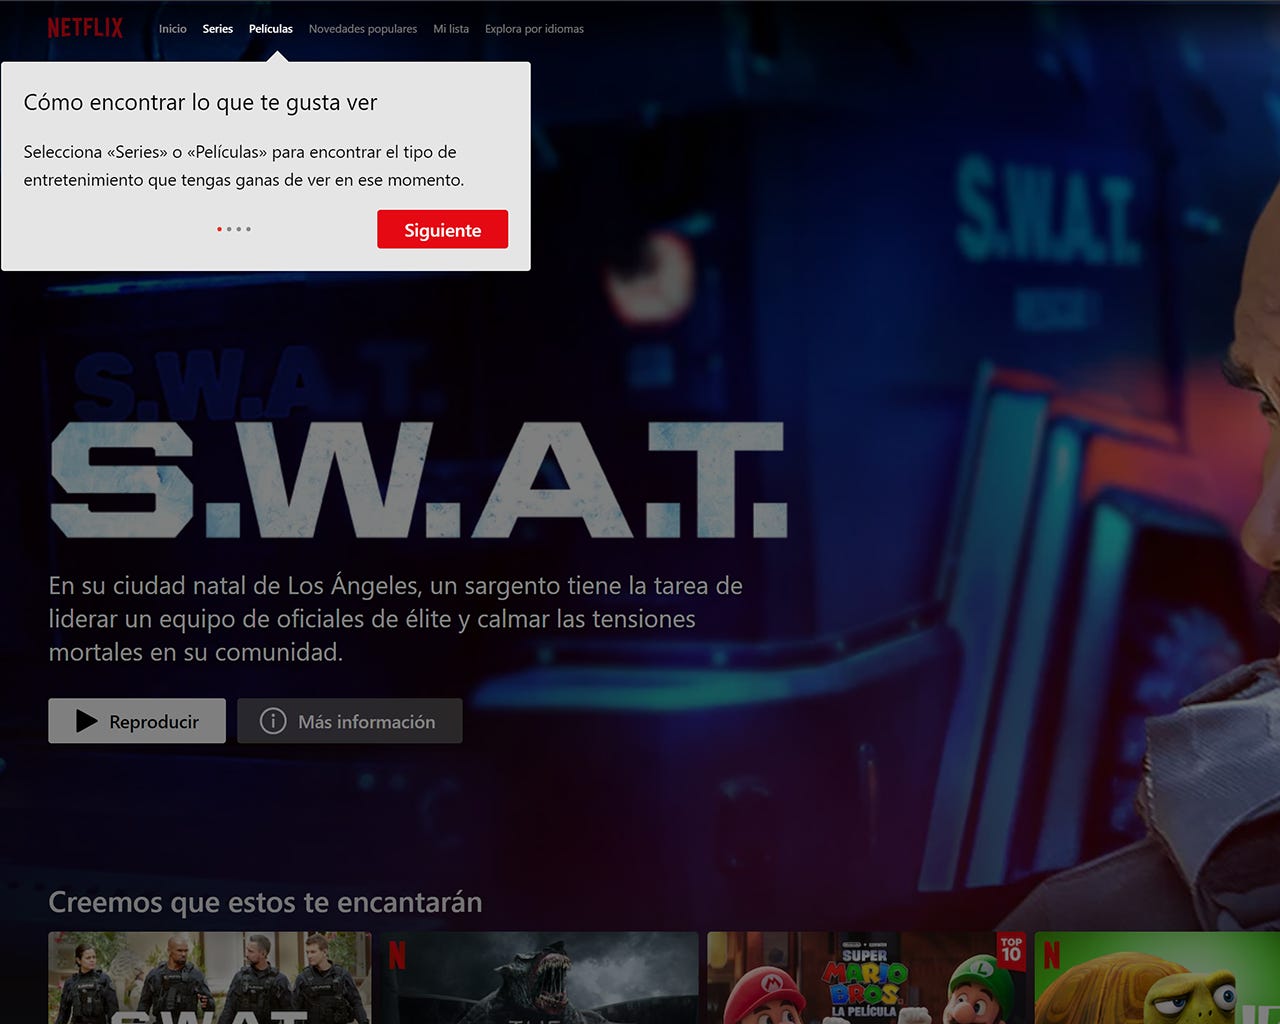 The Netflix initial main screen, with a popup purporting to guide the viewer through how to use the interface. The show "S.W.A.T." is previewed quite large in the center.